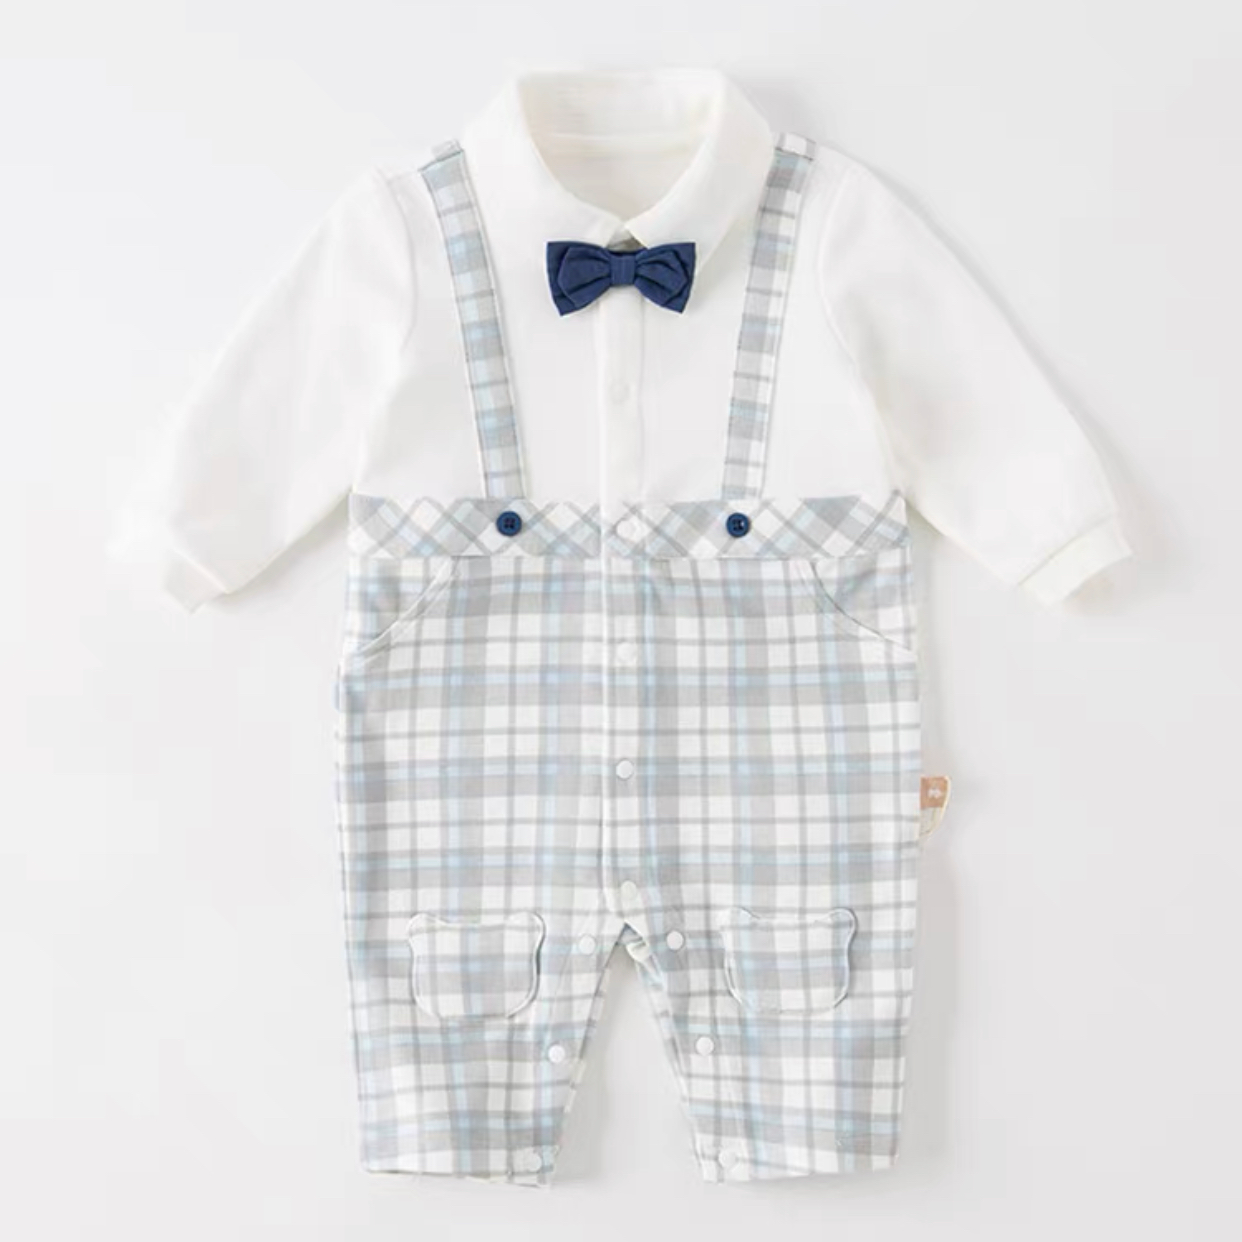 Toddler Boys Plaid Outfit